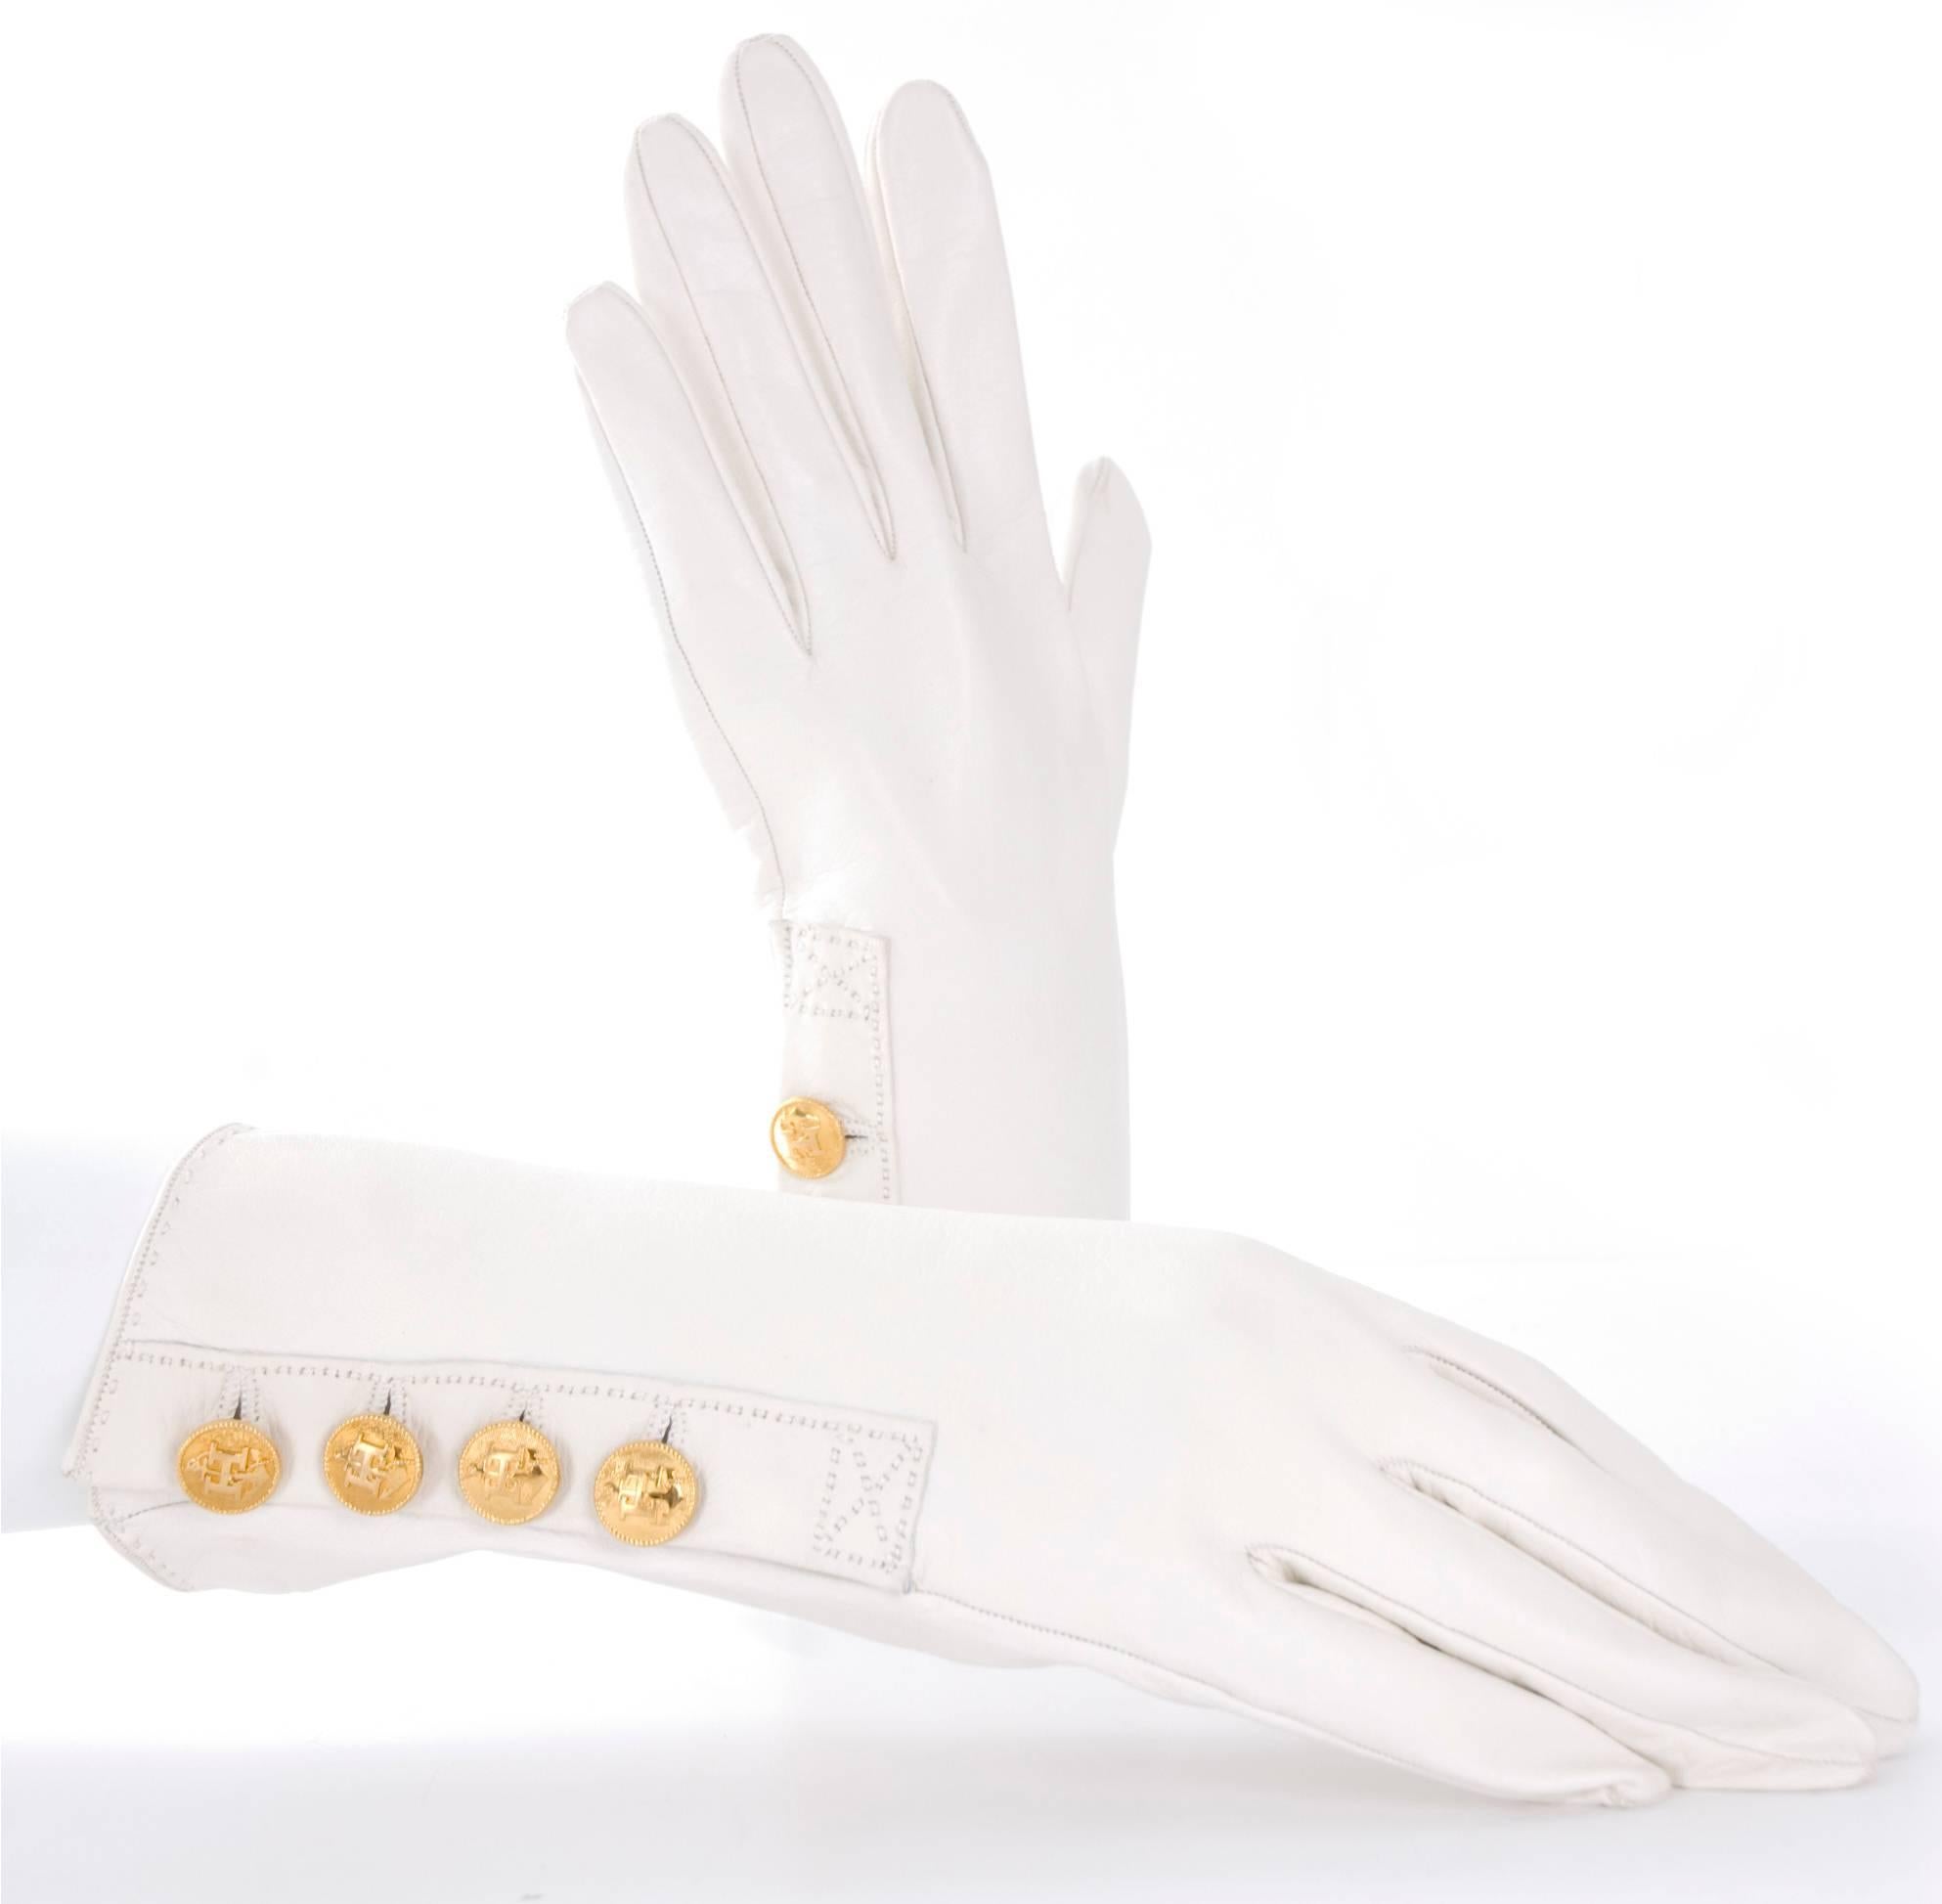 90's Hermes Leather Gloves - like new.
Wonderful white soft leather and gilded buttons with the H logo.
They have never been worn and in excellent condition. No stains or signs of wear at all. Anything dark in the pictures are shadows.
Size 7,5
